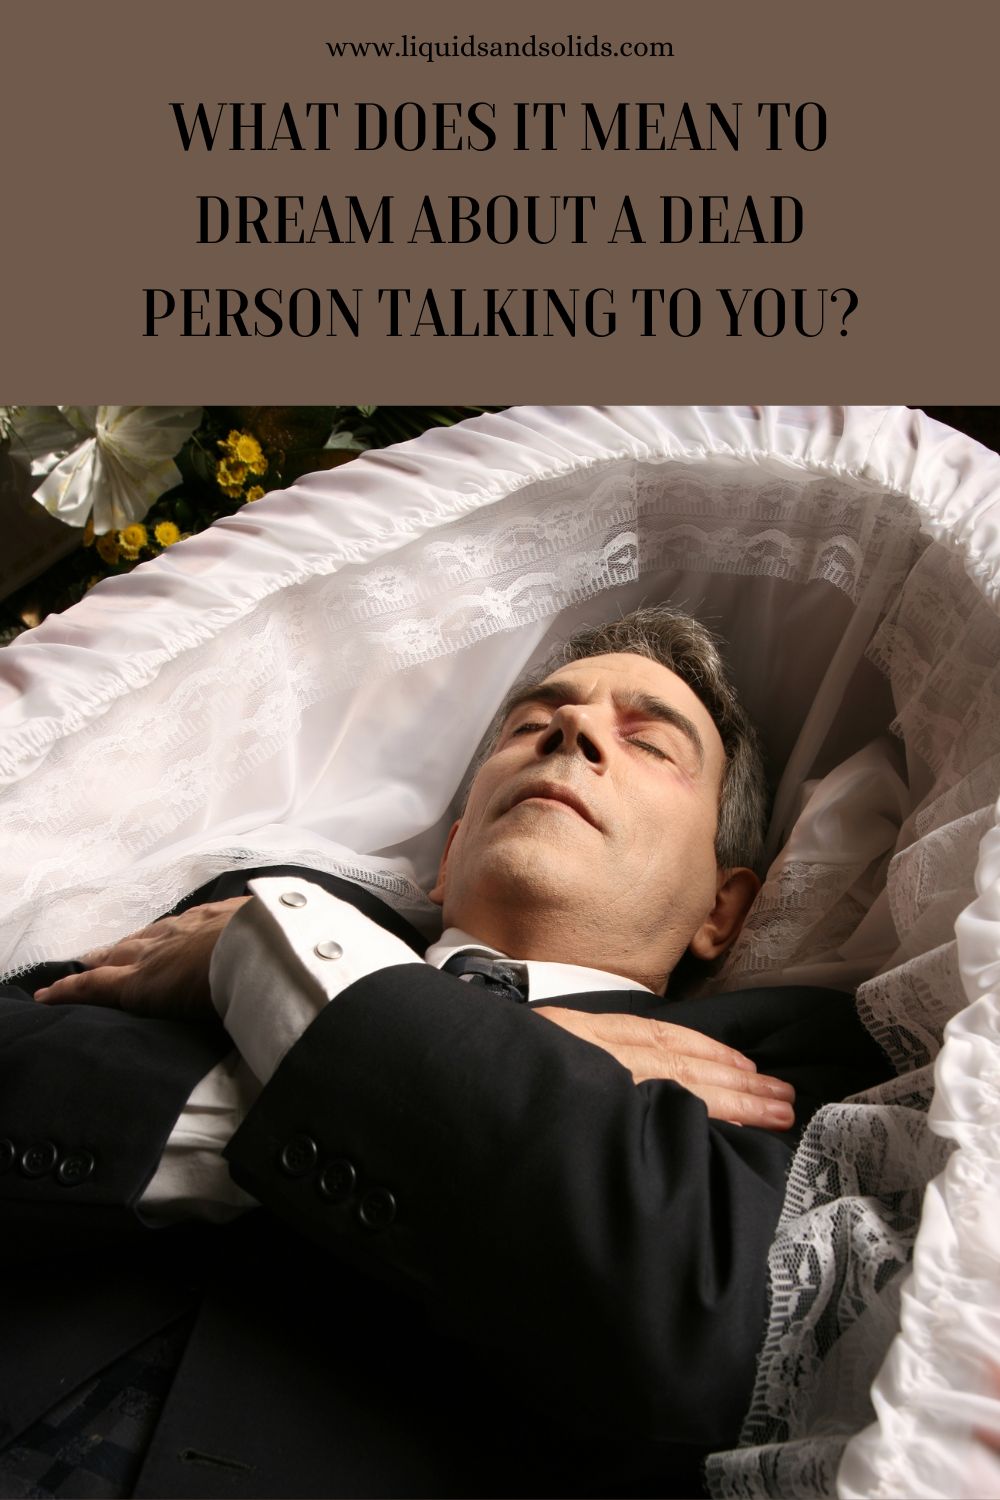 What Does It Mean If A Dead Person Is Not Talking In Your Dream?